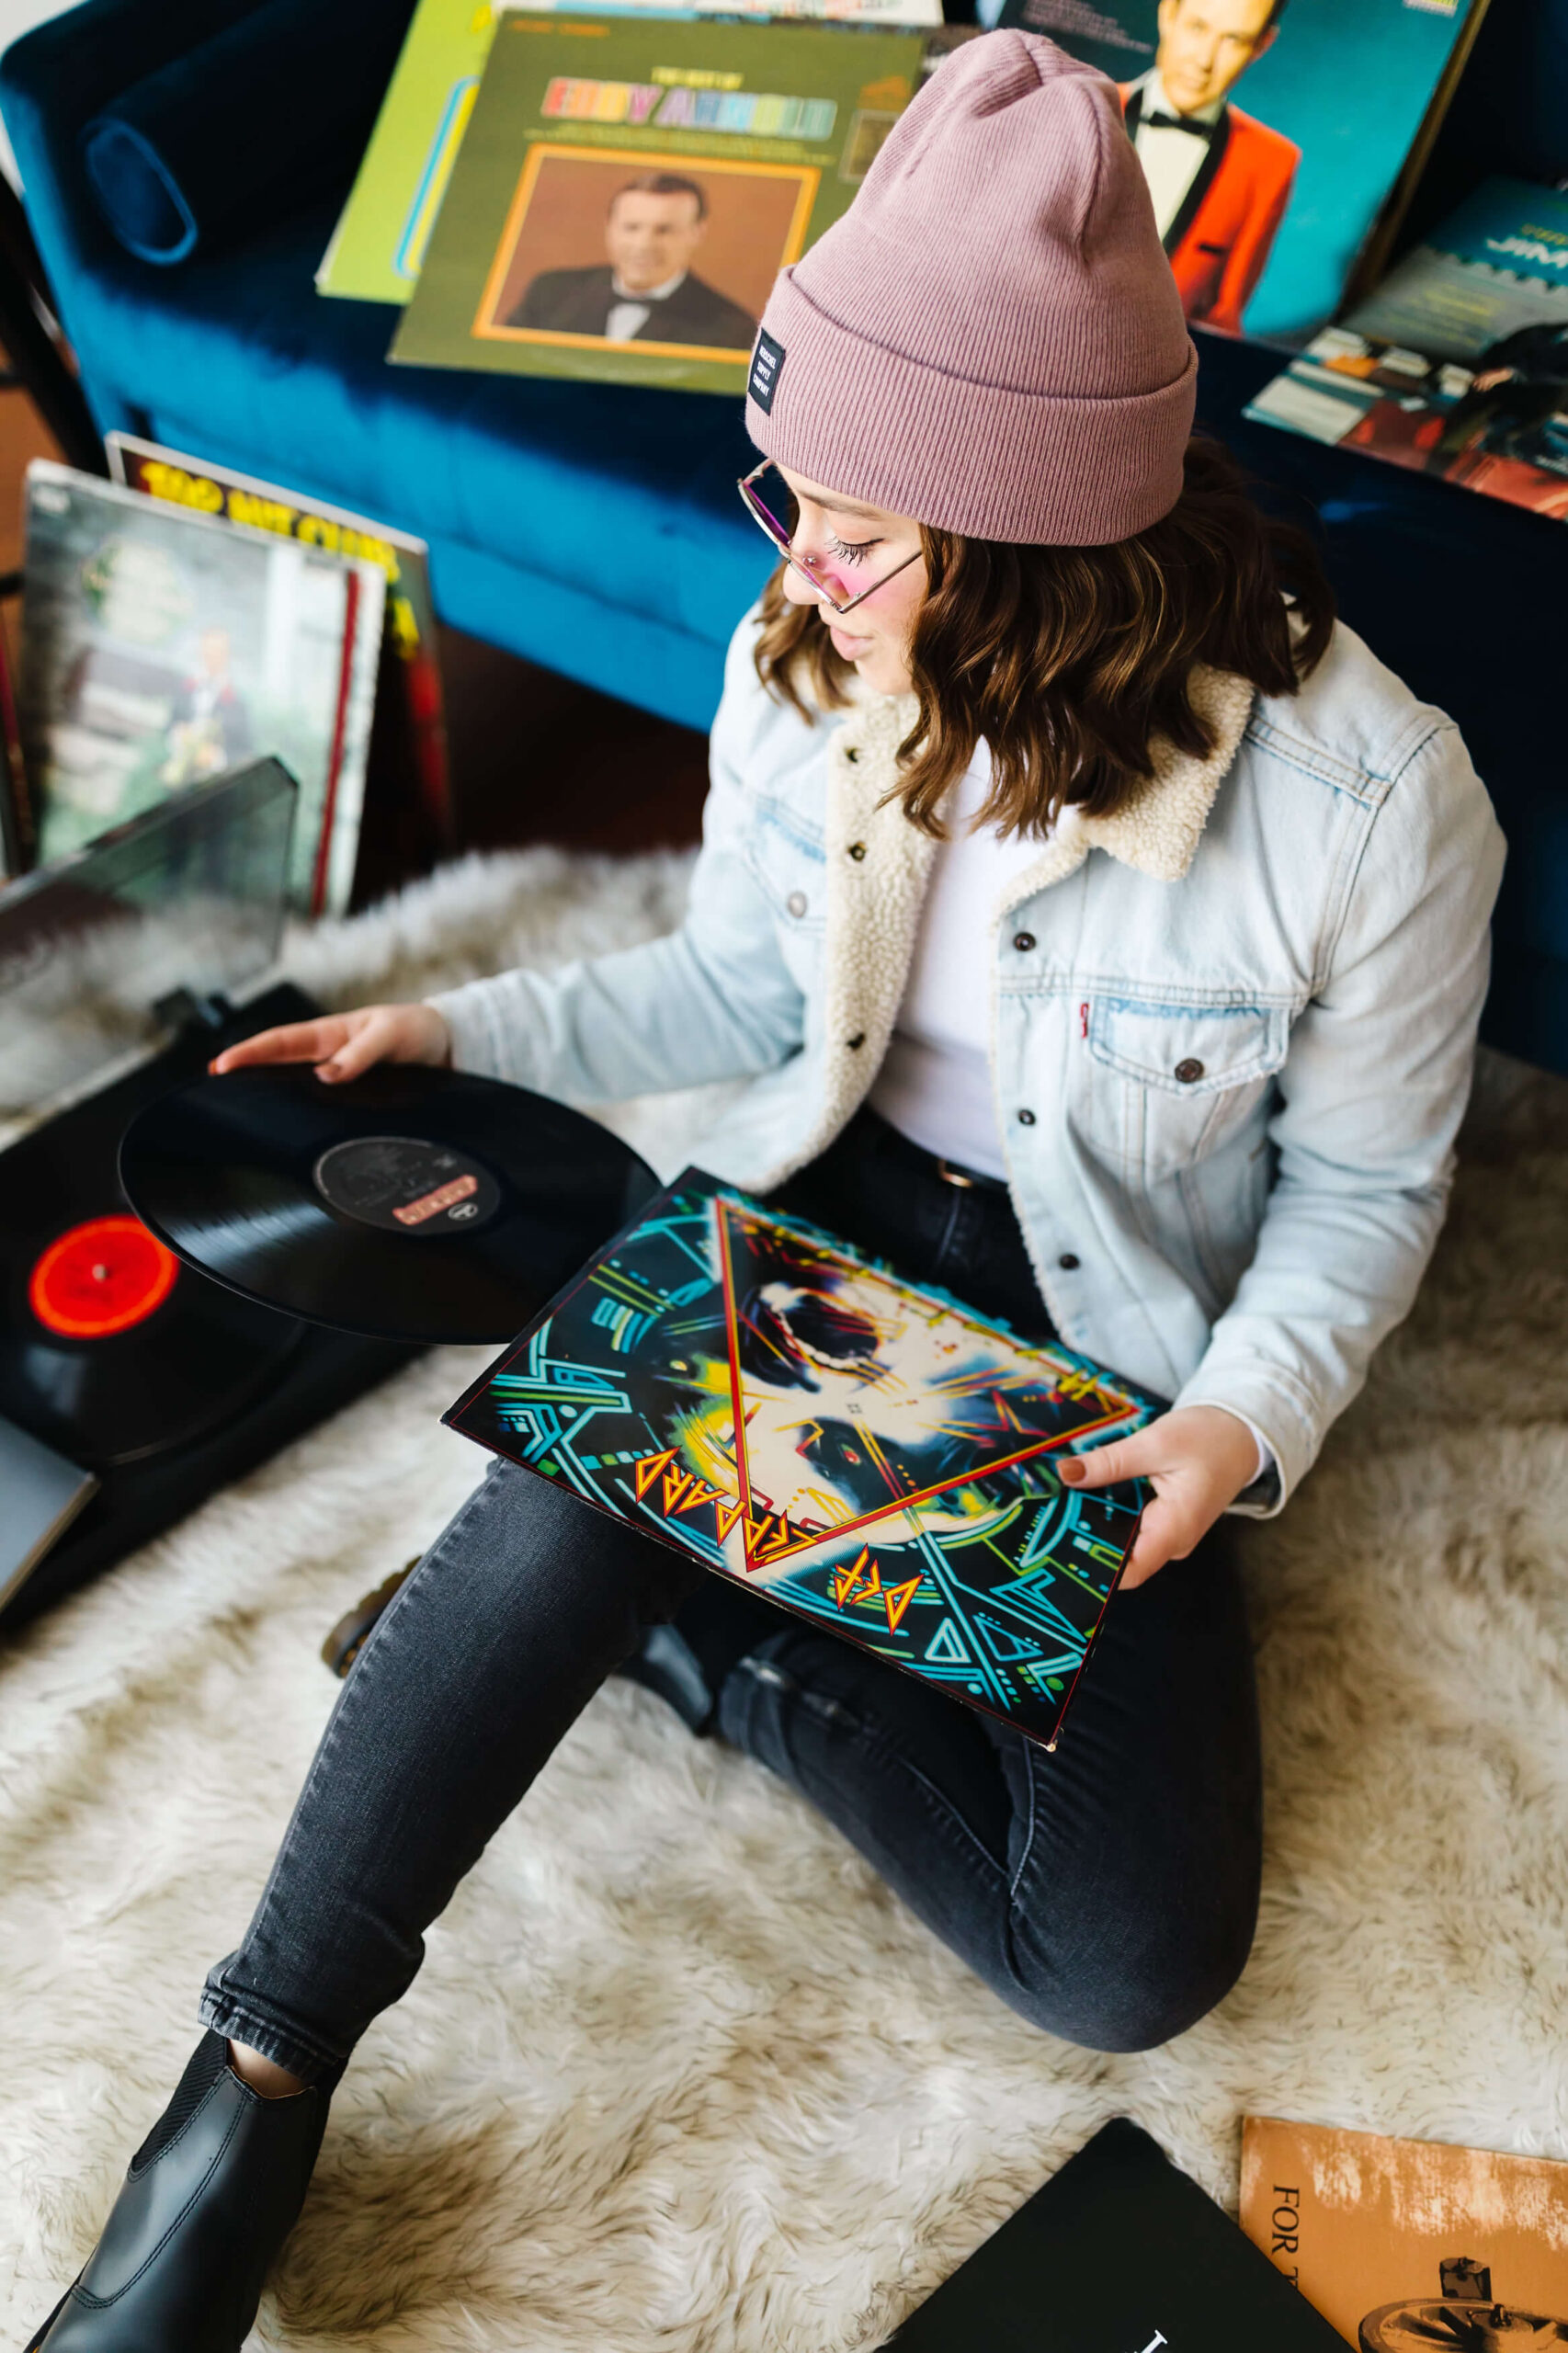 girl wearing pink beanie, blue jean jacket and neon pink sunglasses sitting in front of blue velvet couch putting a vinyl record album on a record player during senior studio photoshoot